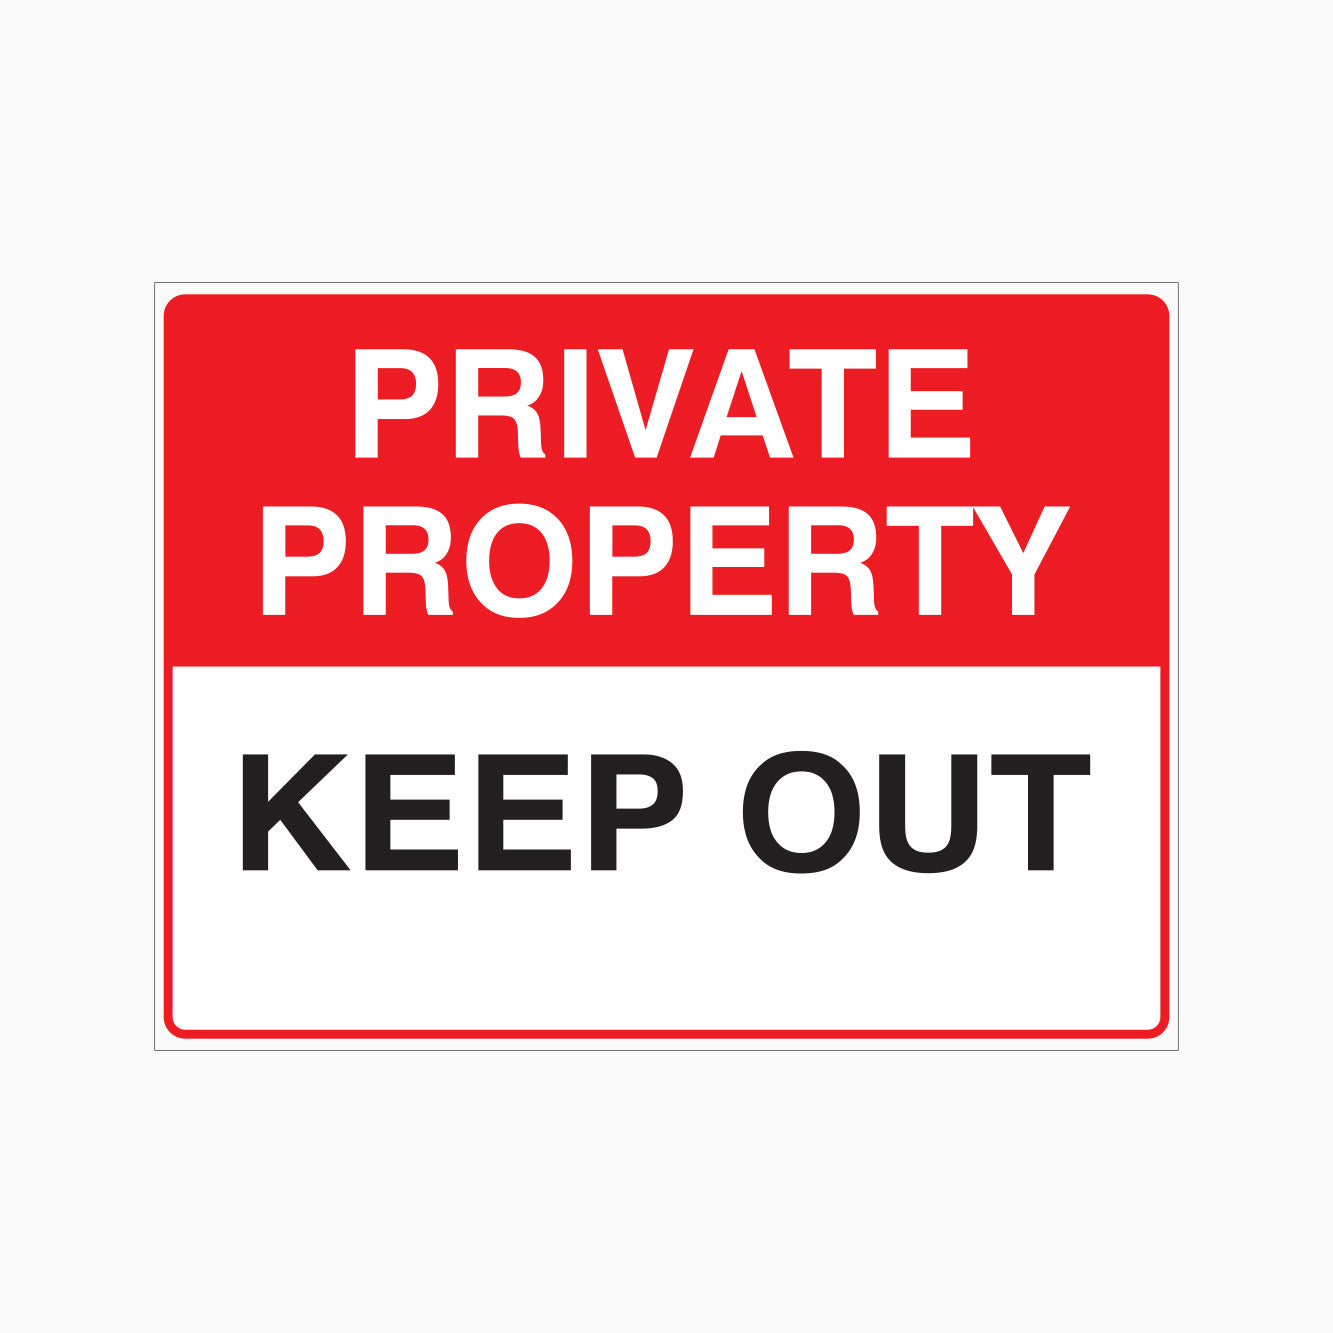 PRIVATE PROPERTY - KEEP OUT SIGN